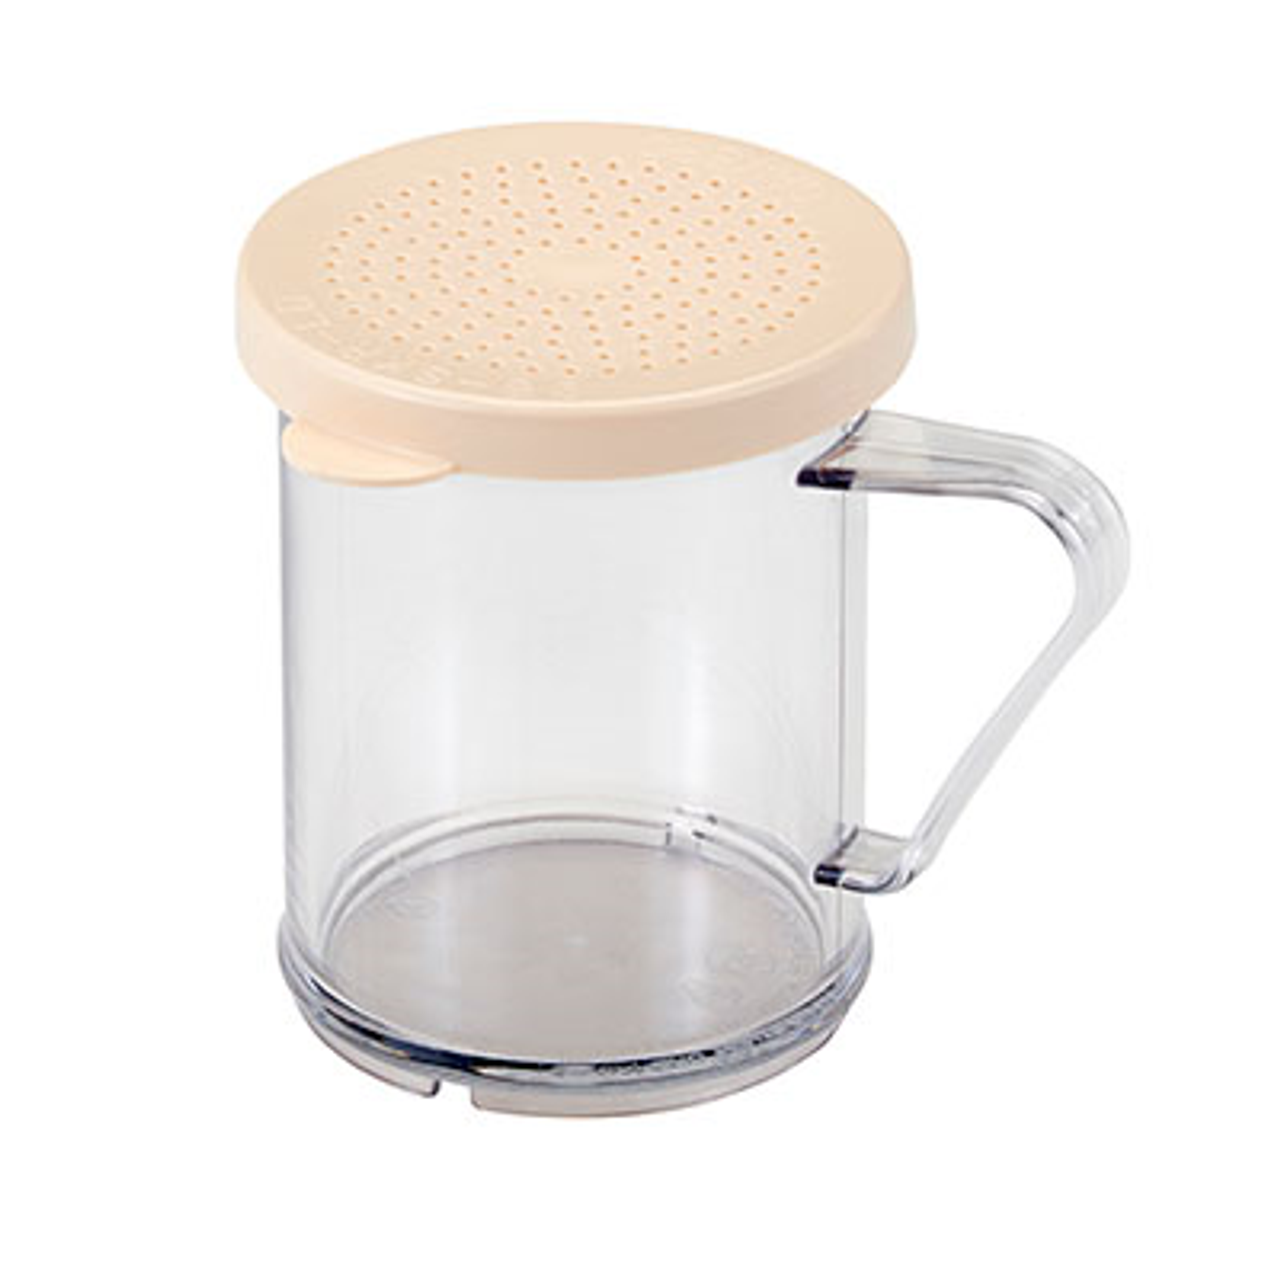 https://cdn11.bigcommerce.com/s-g3i86bef61/images/stencil/1280x1280/products/4316/2156/Cambro-96SKRD135-Camwear-Shaker-Dredge__36689.1663959473.png?c=1